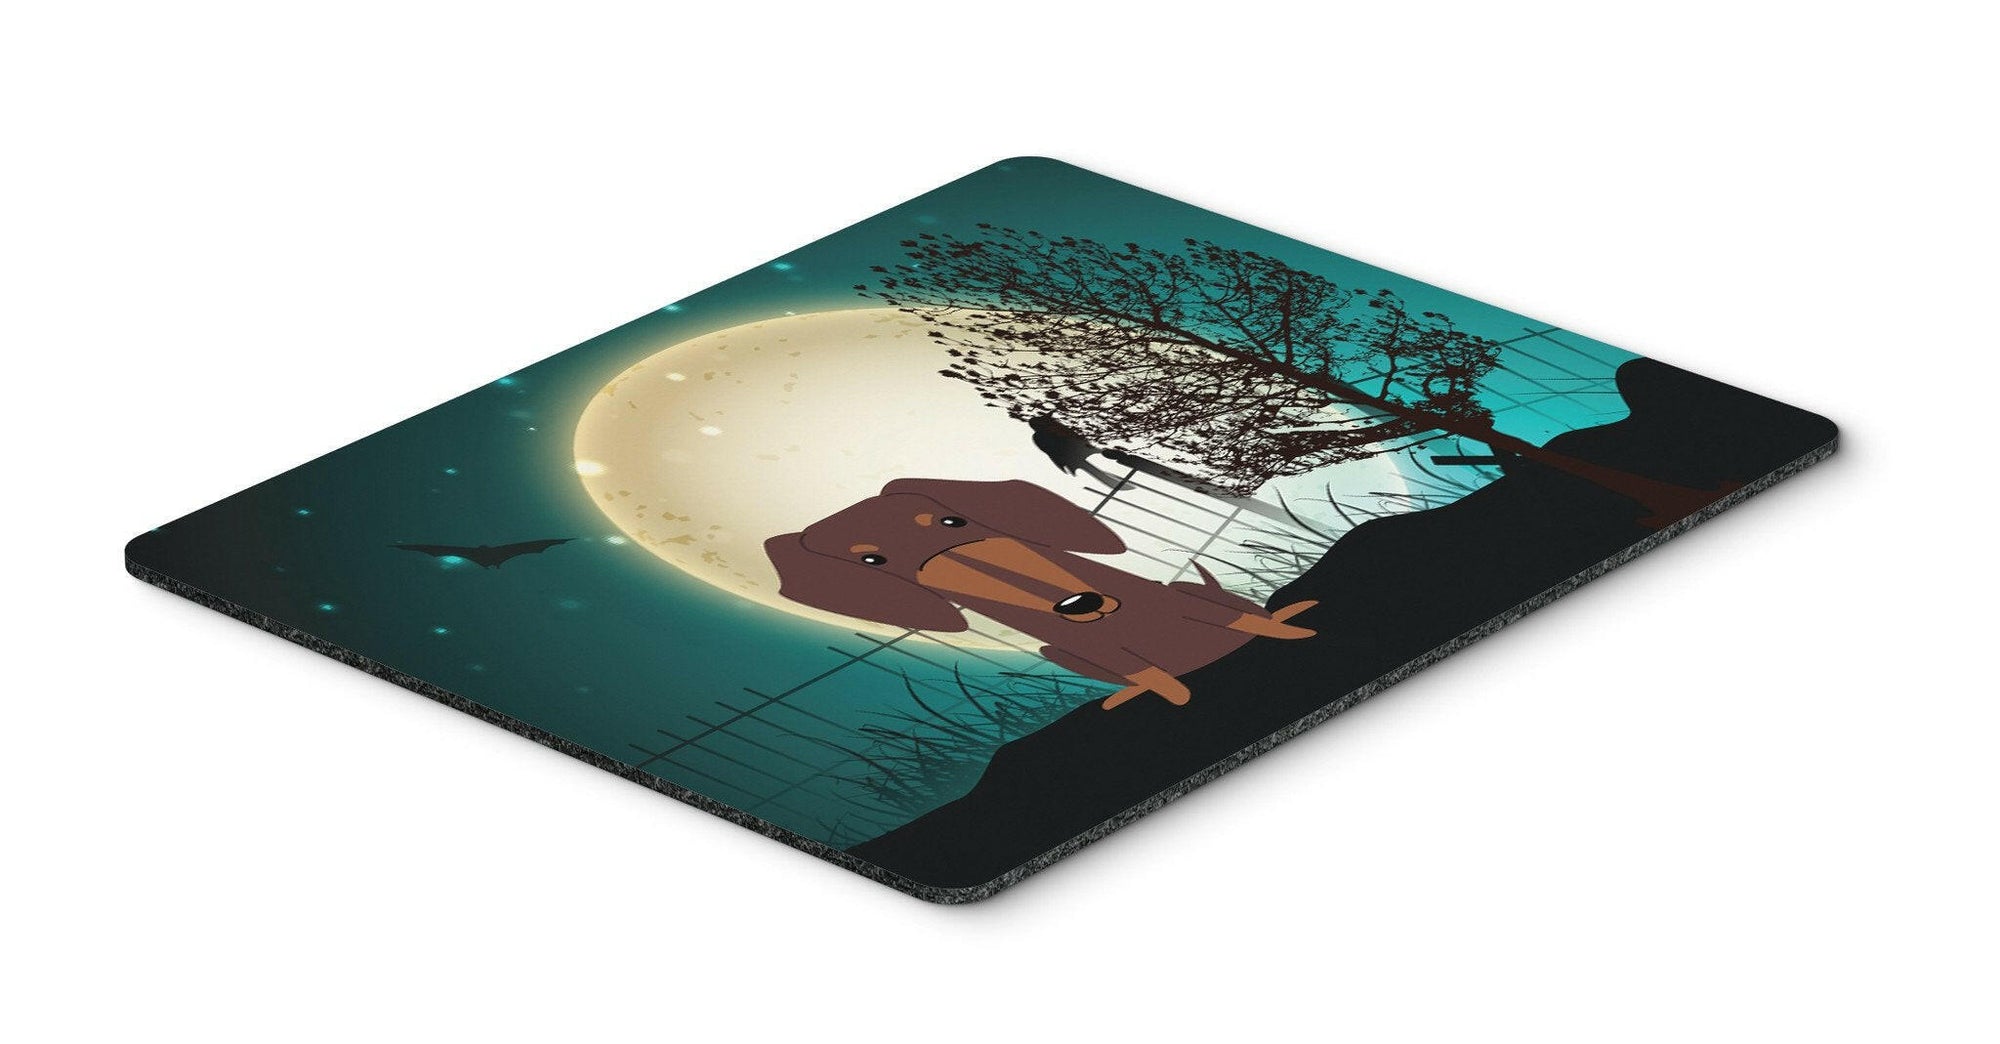 Halloween Scary Dachshund Chocolate Mouse Pad, Hot Pad or Trivet BB2321MP by Caroline's Treasures